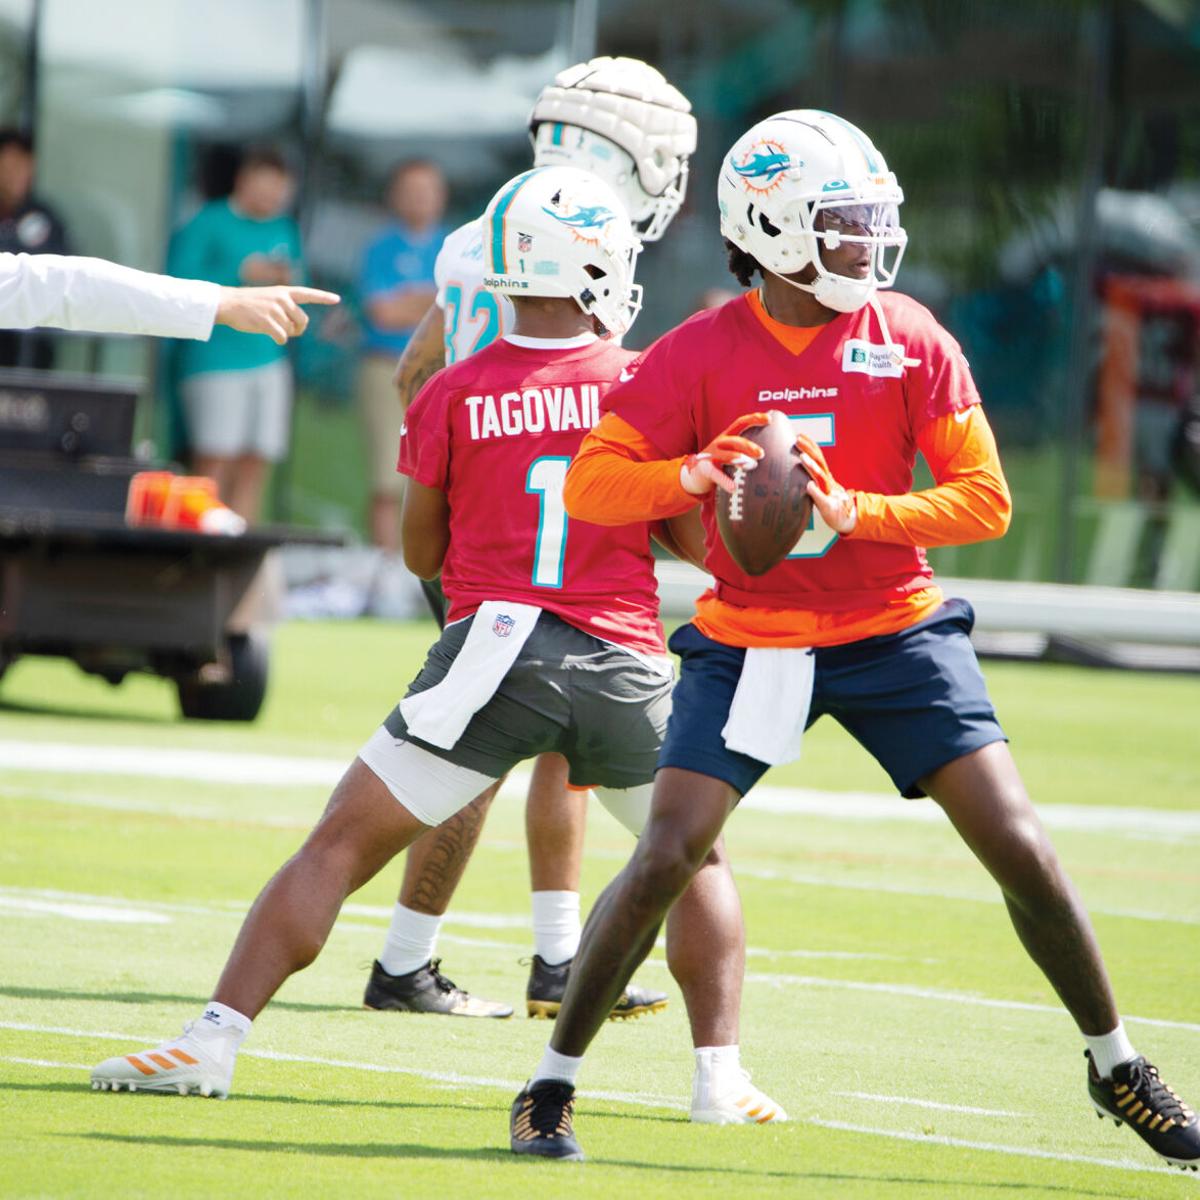 Local legends thrill at Dolphins training camp